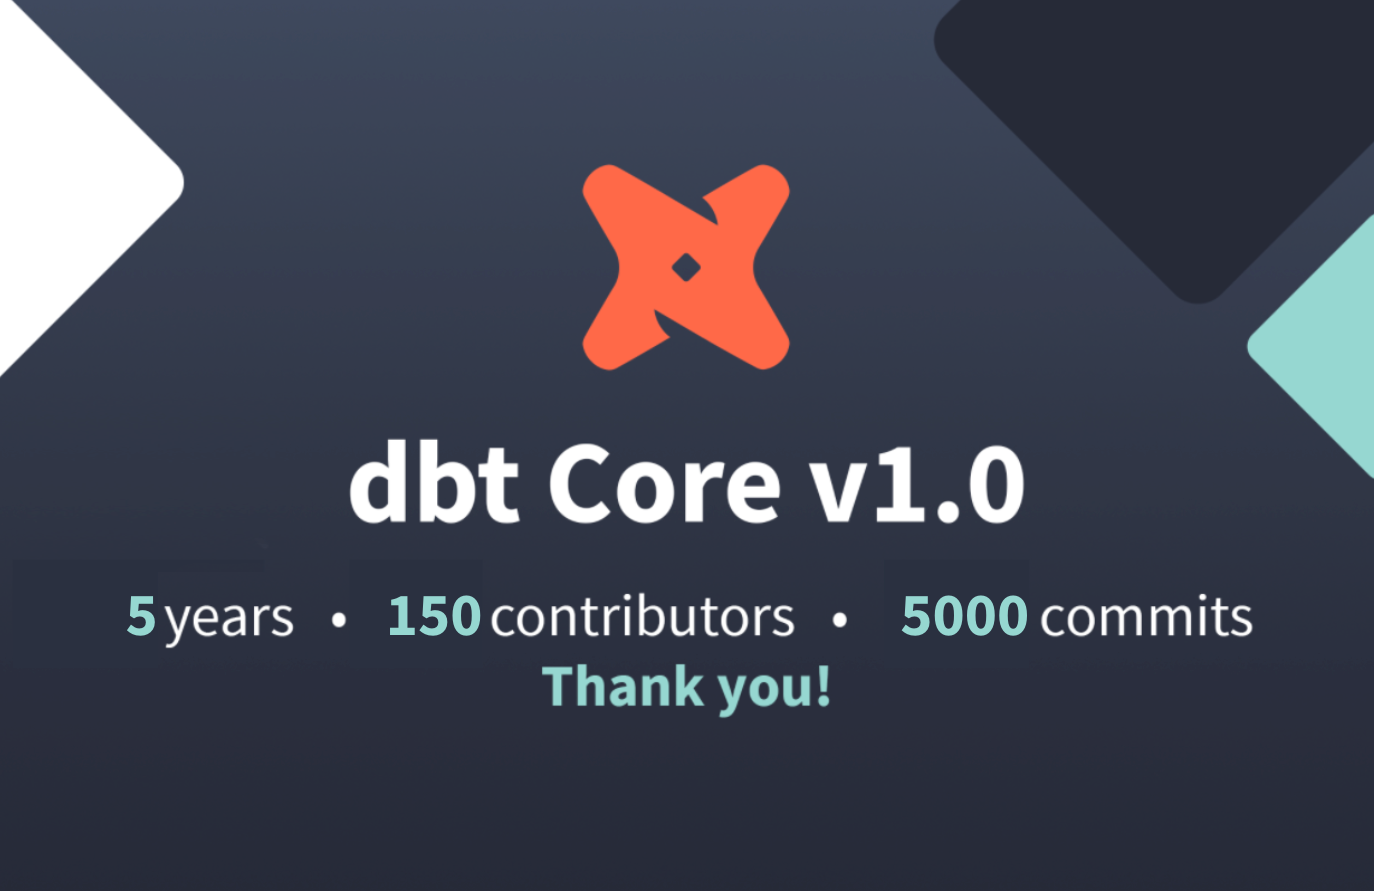 dbt Core v1.0 is here: 200+ contributors, 5,000 commits, 100x faster parsing speed